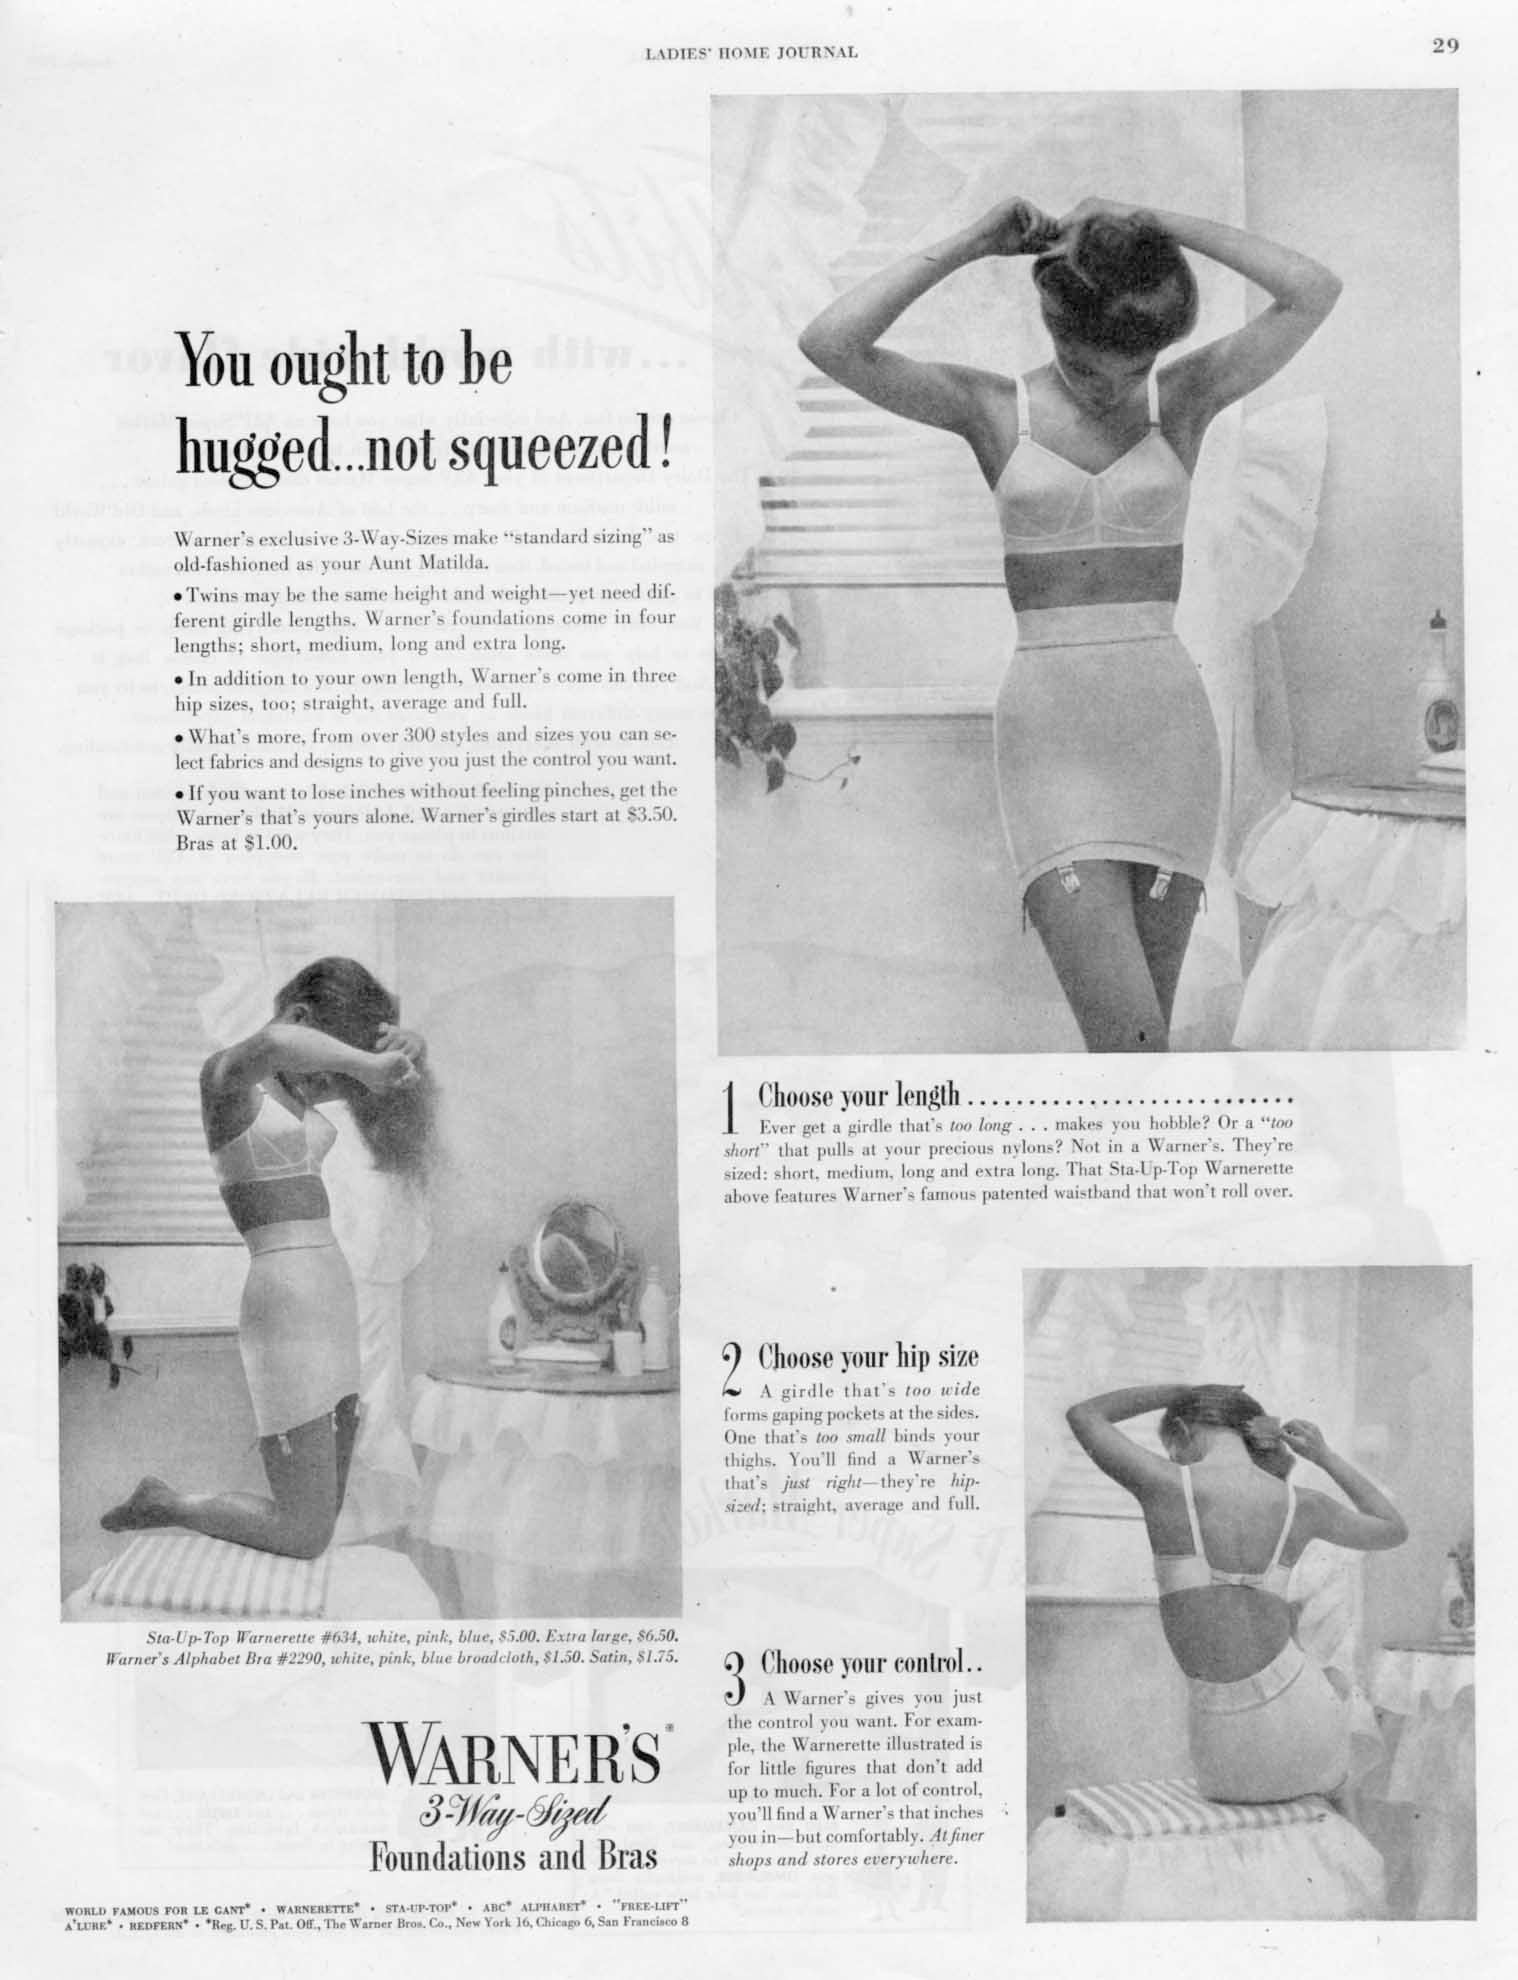 This $8 girdle works like a $12 pantie girdle Warner's Young Thing ad 1966 L